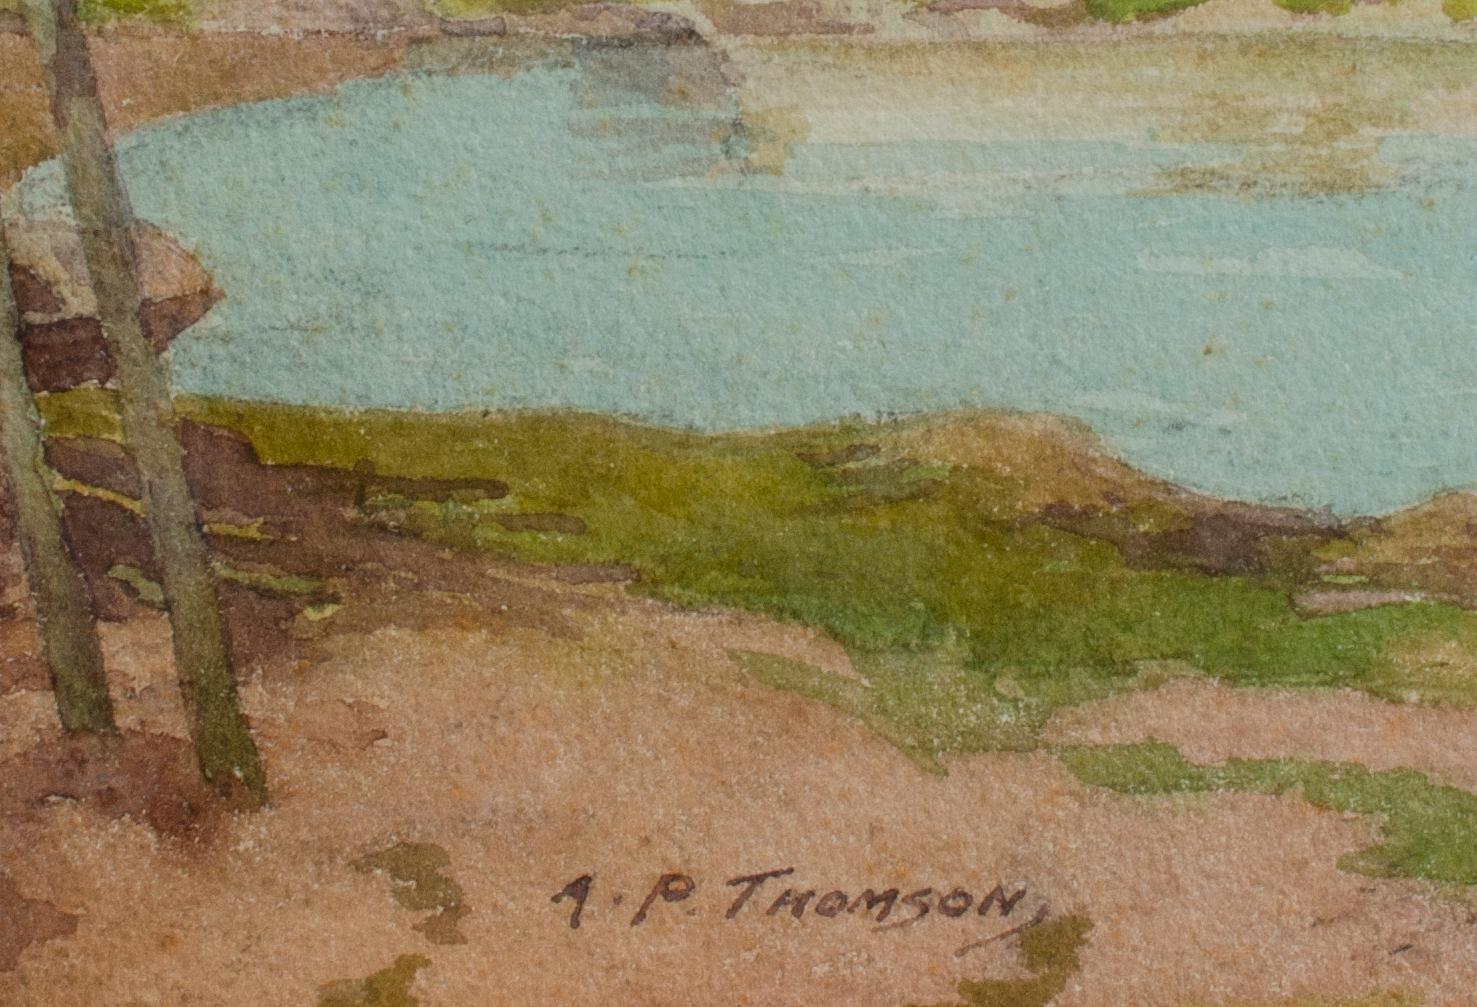 Alexander P. Thomson, R.S.W. (Scottish, 1887-1962)
Plockton (Ross-shire, Scotland), 20th century
Watercolor on paper
15 x 22 in.
Framed: 25 1/16 x 32 in.
Signed lower left: A.P. Thomson
Royal Scottish Society of Painters in Water-Colours Label